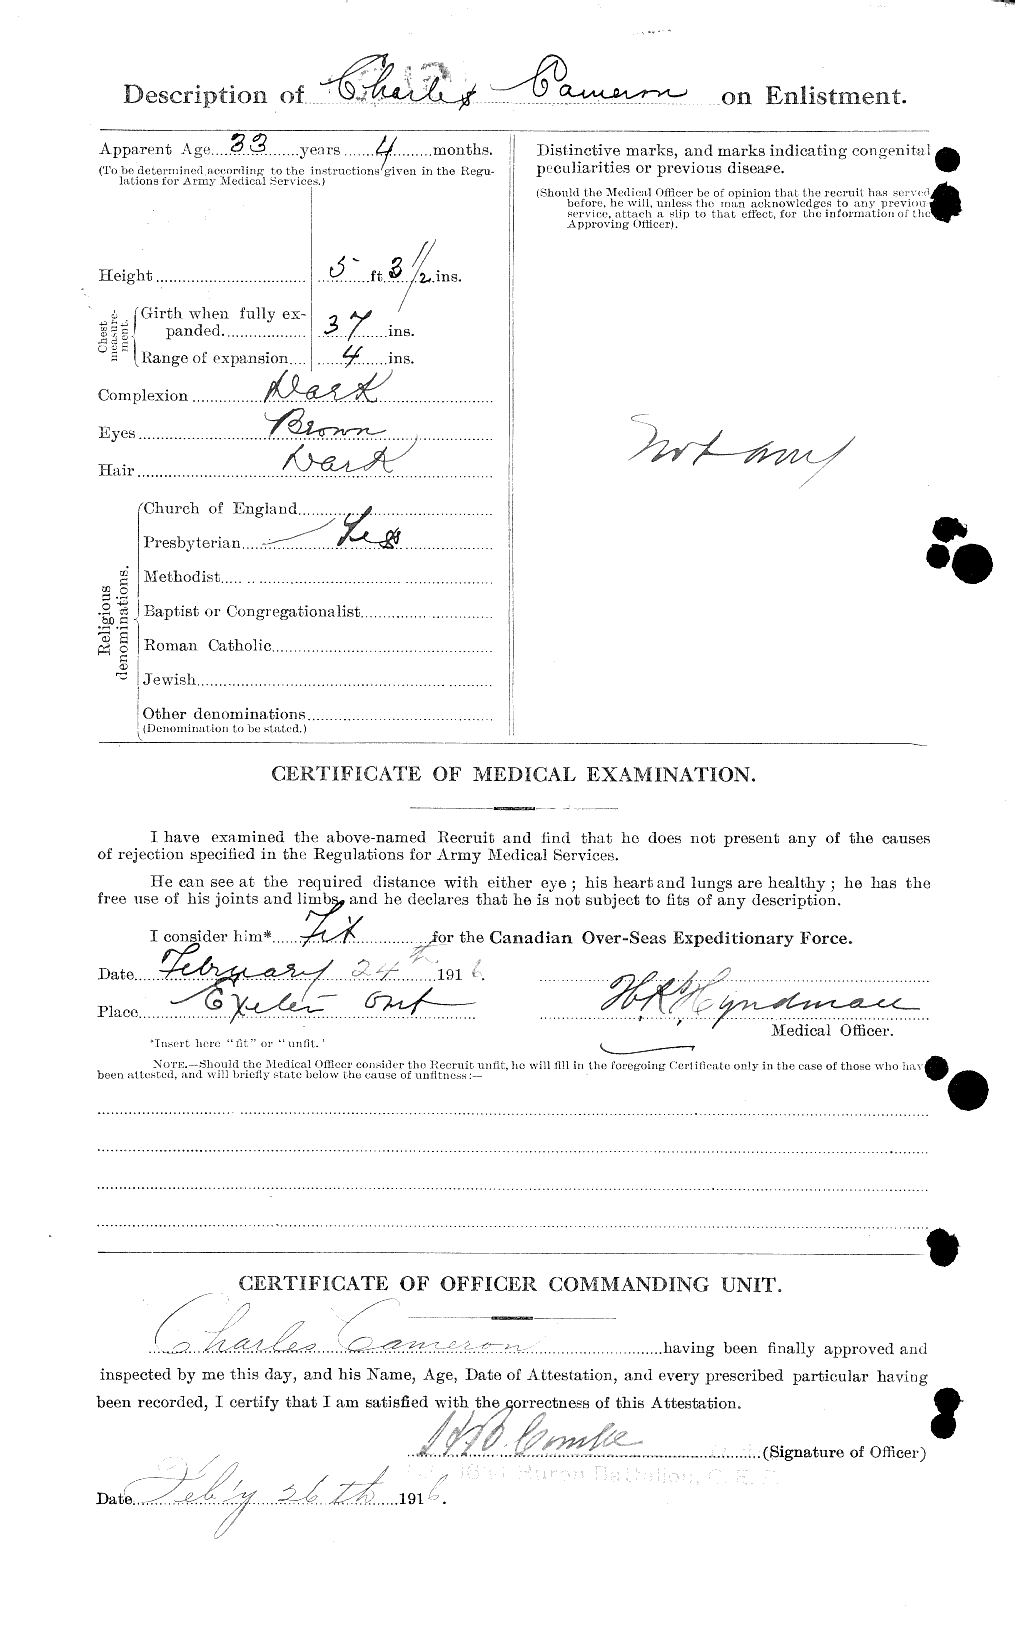 Personnel Records of the First World War - CEF 002593b